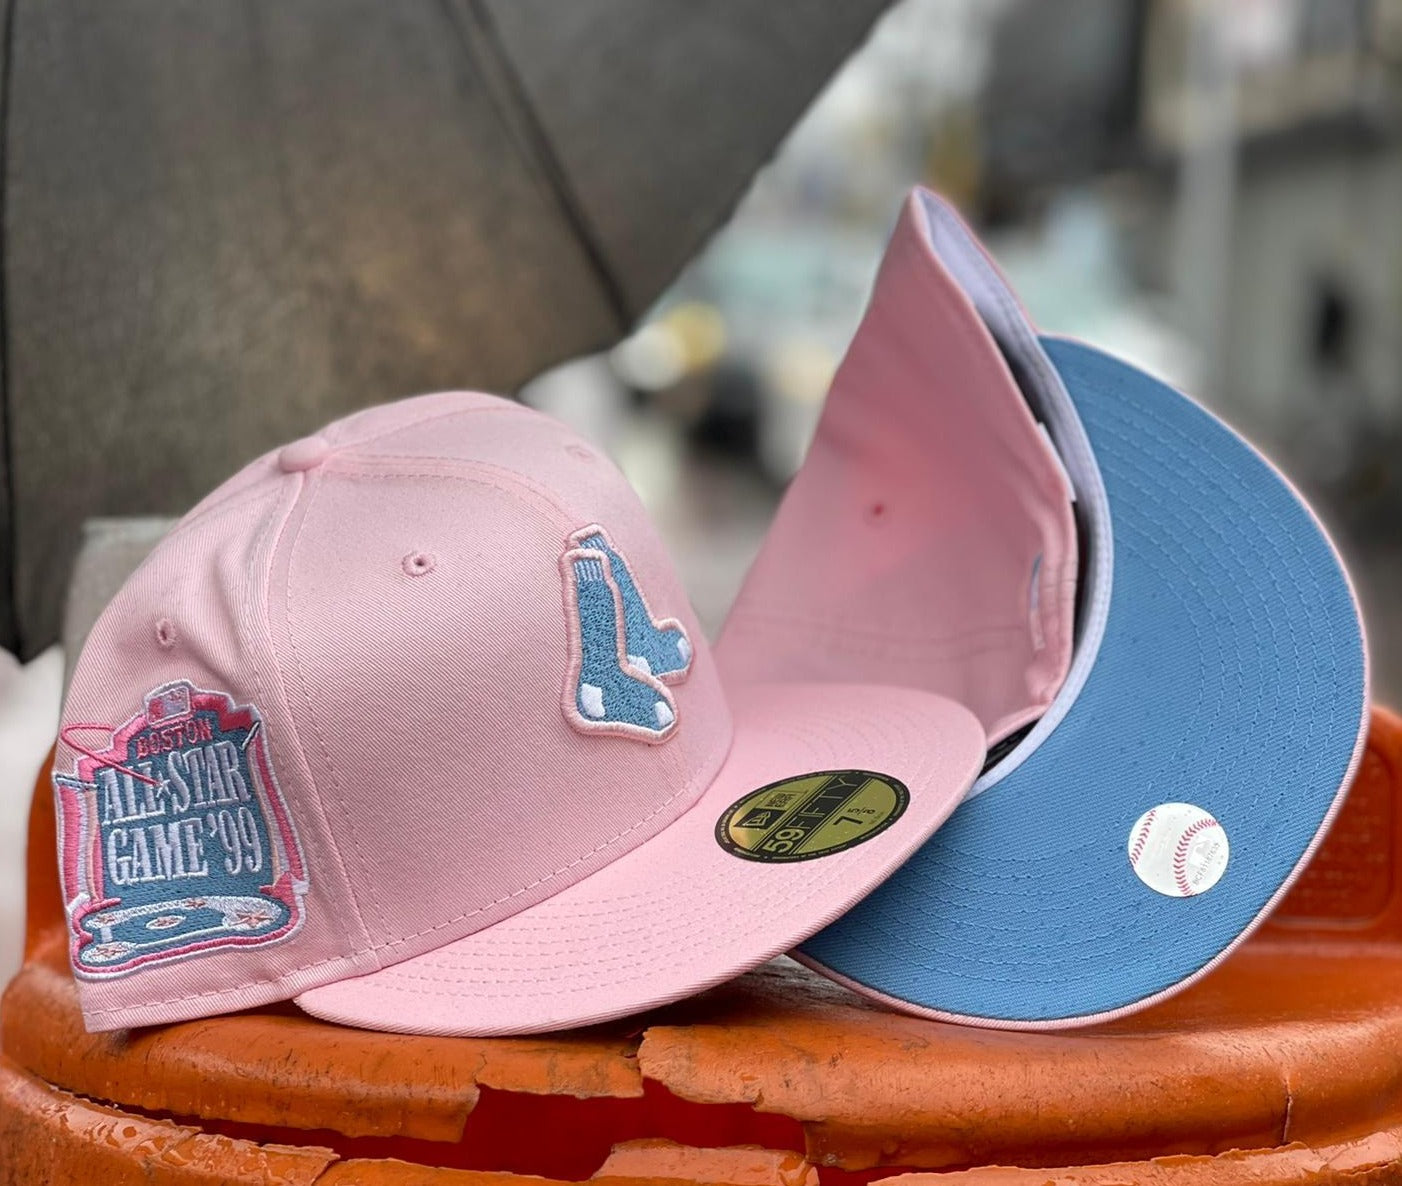 HOW TO MAKE YOUR OWN COTTON CANDY NEW ERA 59FIFTY CUSTOM (PINK UV